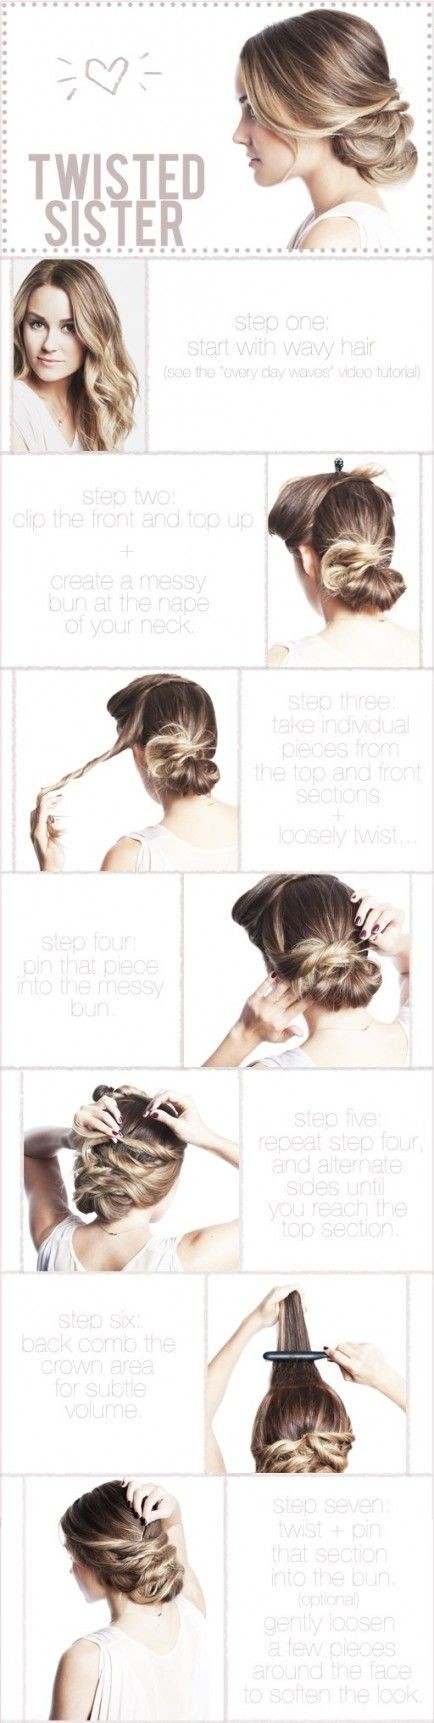 10 Super Easy Updo Hairstyles Tutorials Popular Haircuts